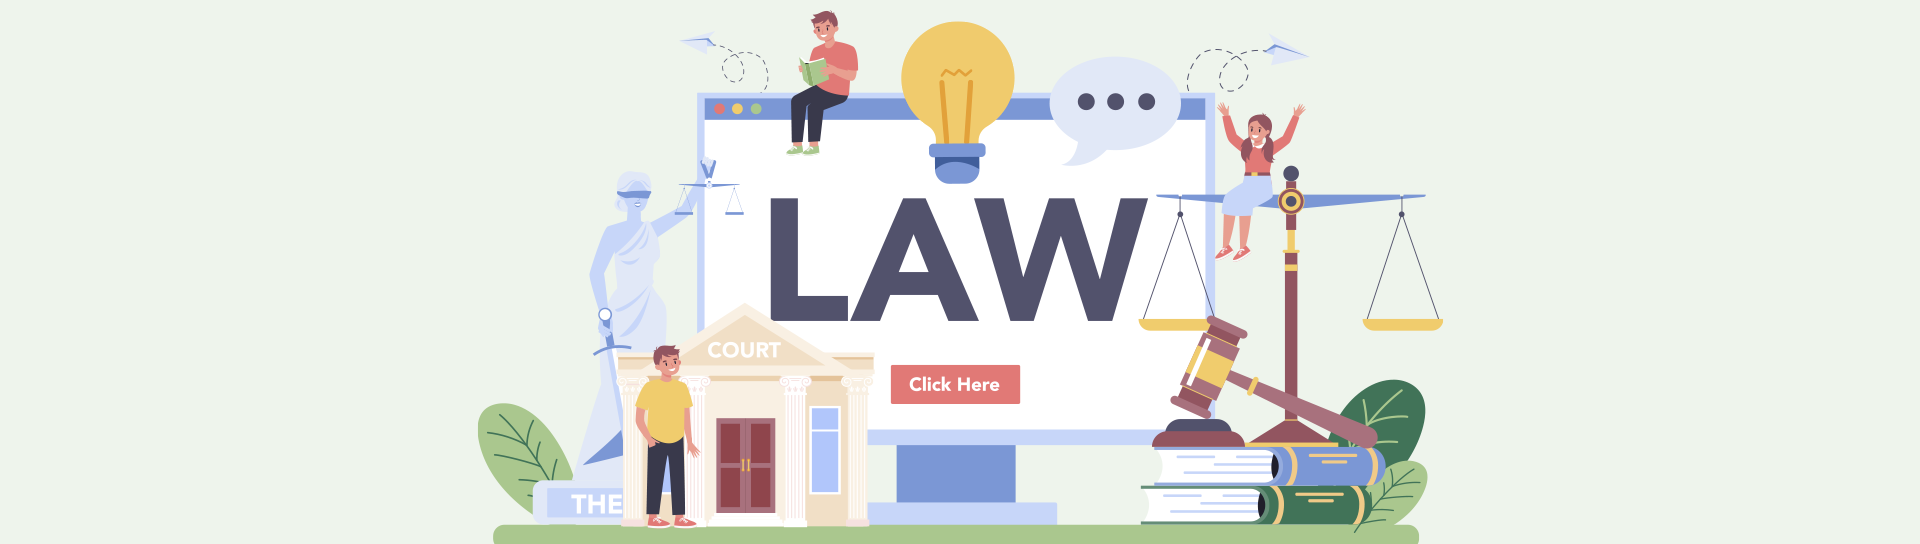 seo-for-law-firm-websites